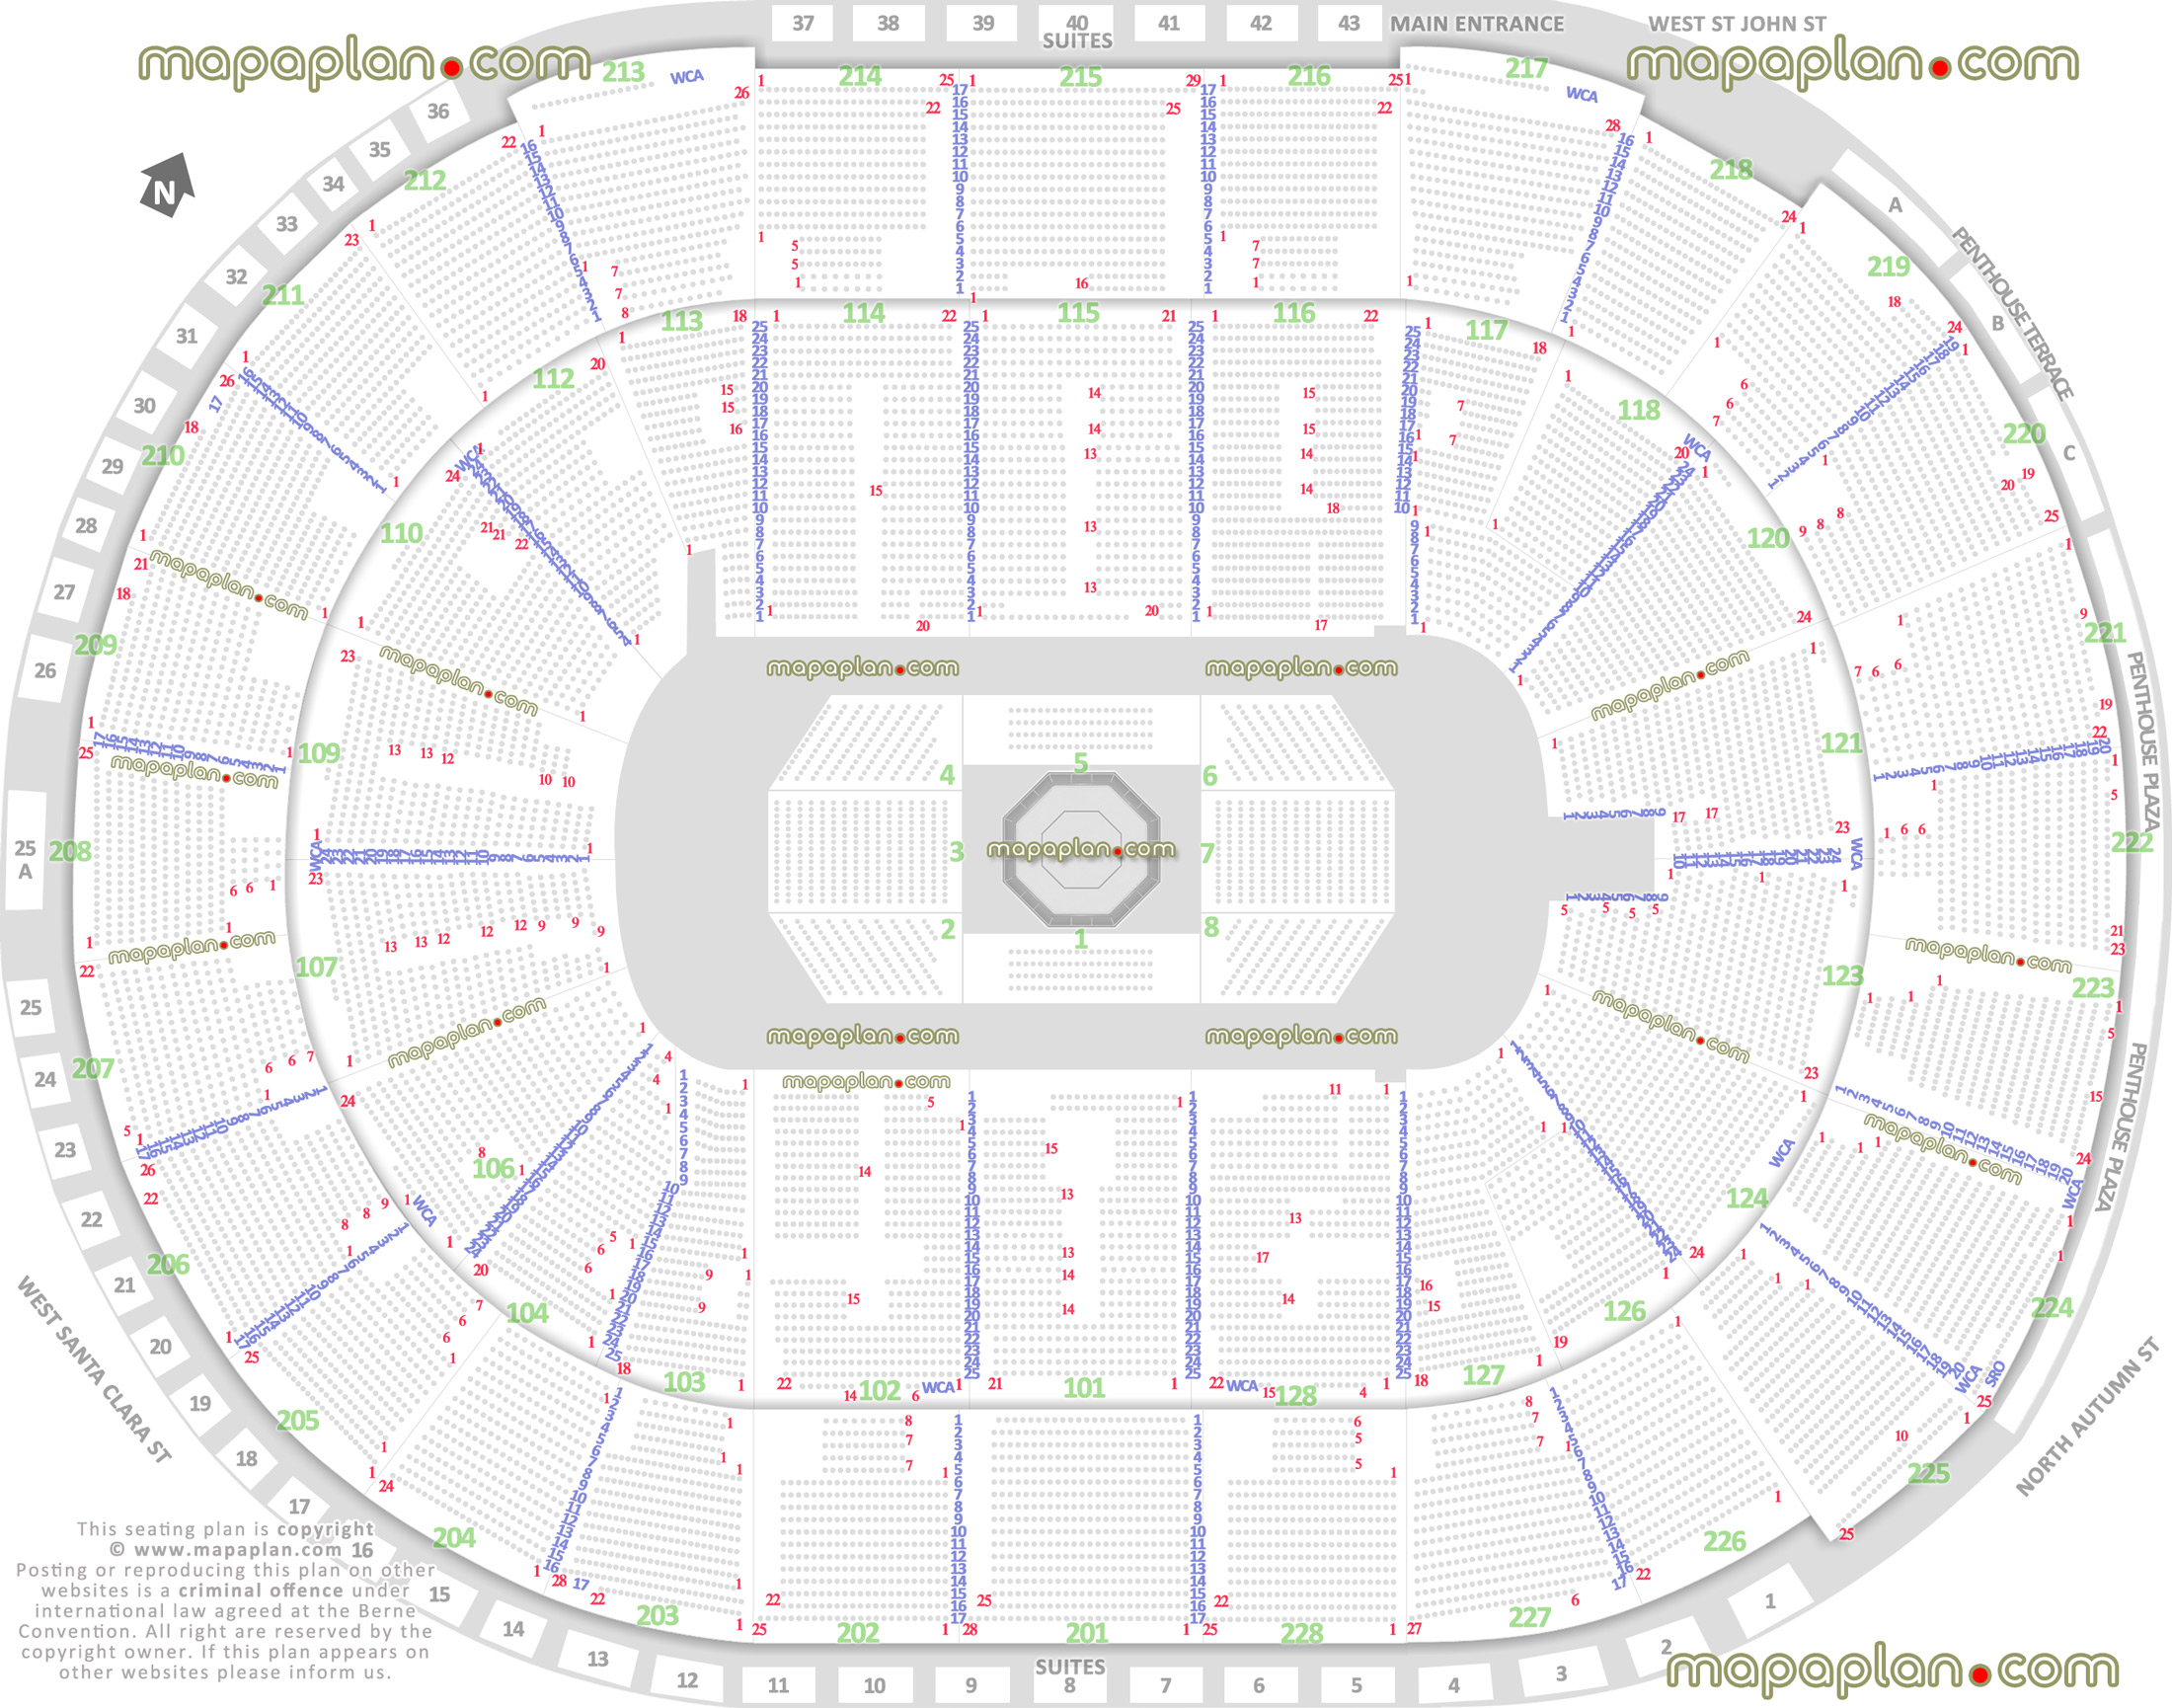 Sap Center Seating Chart Rows